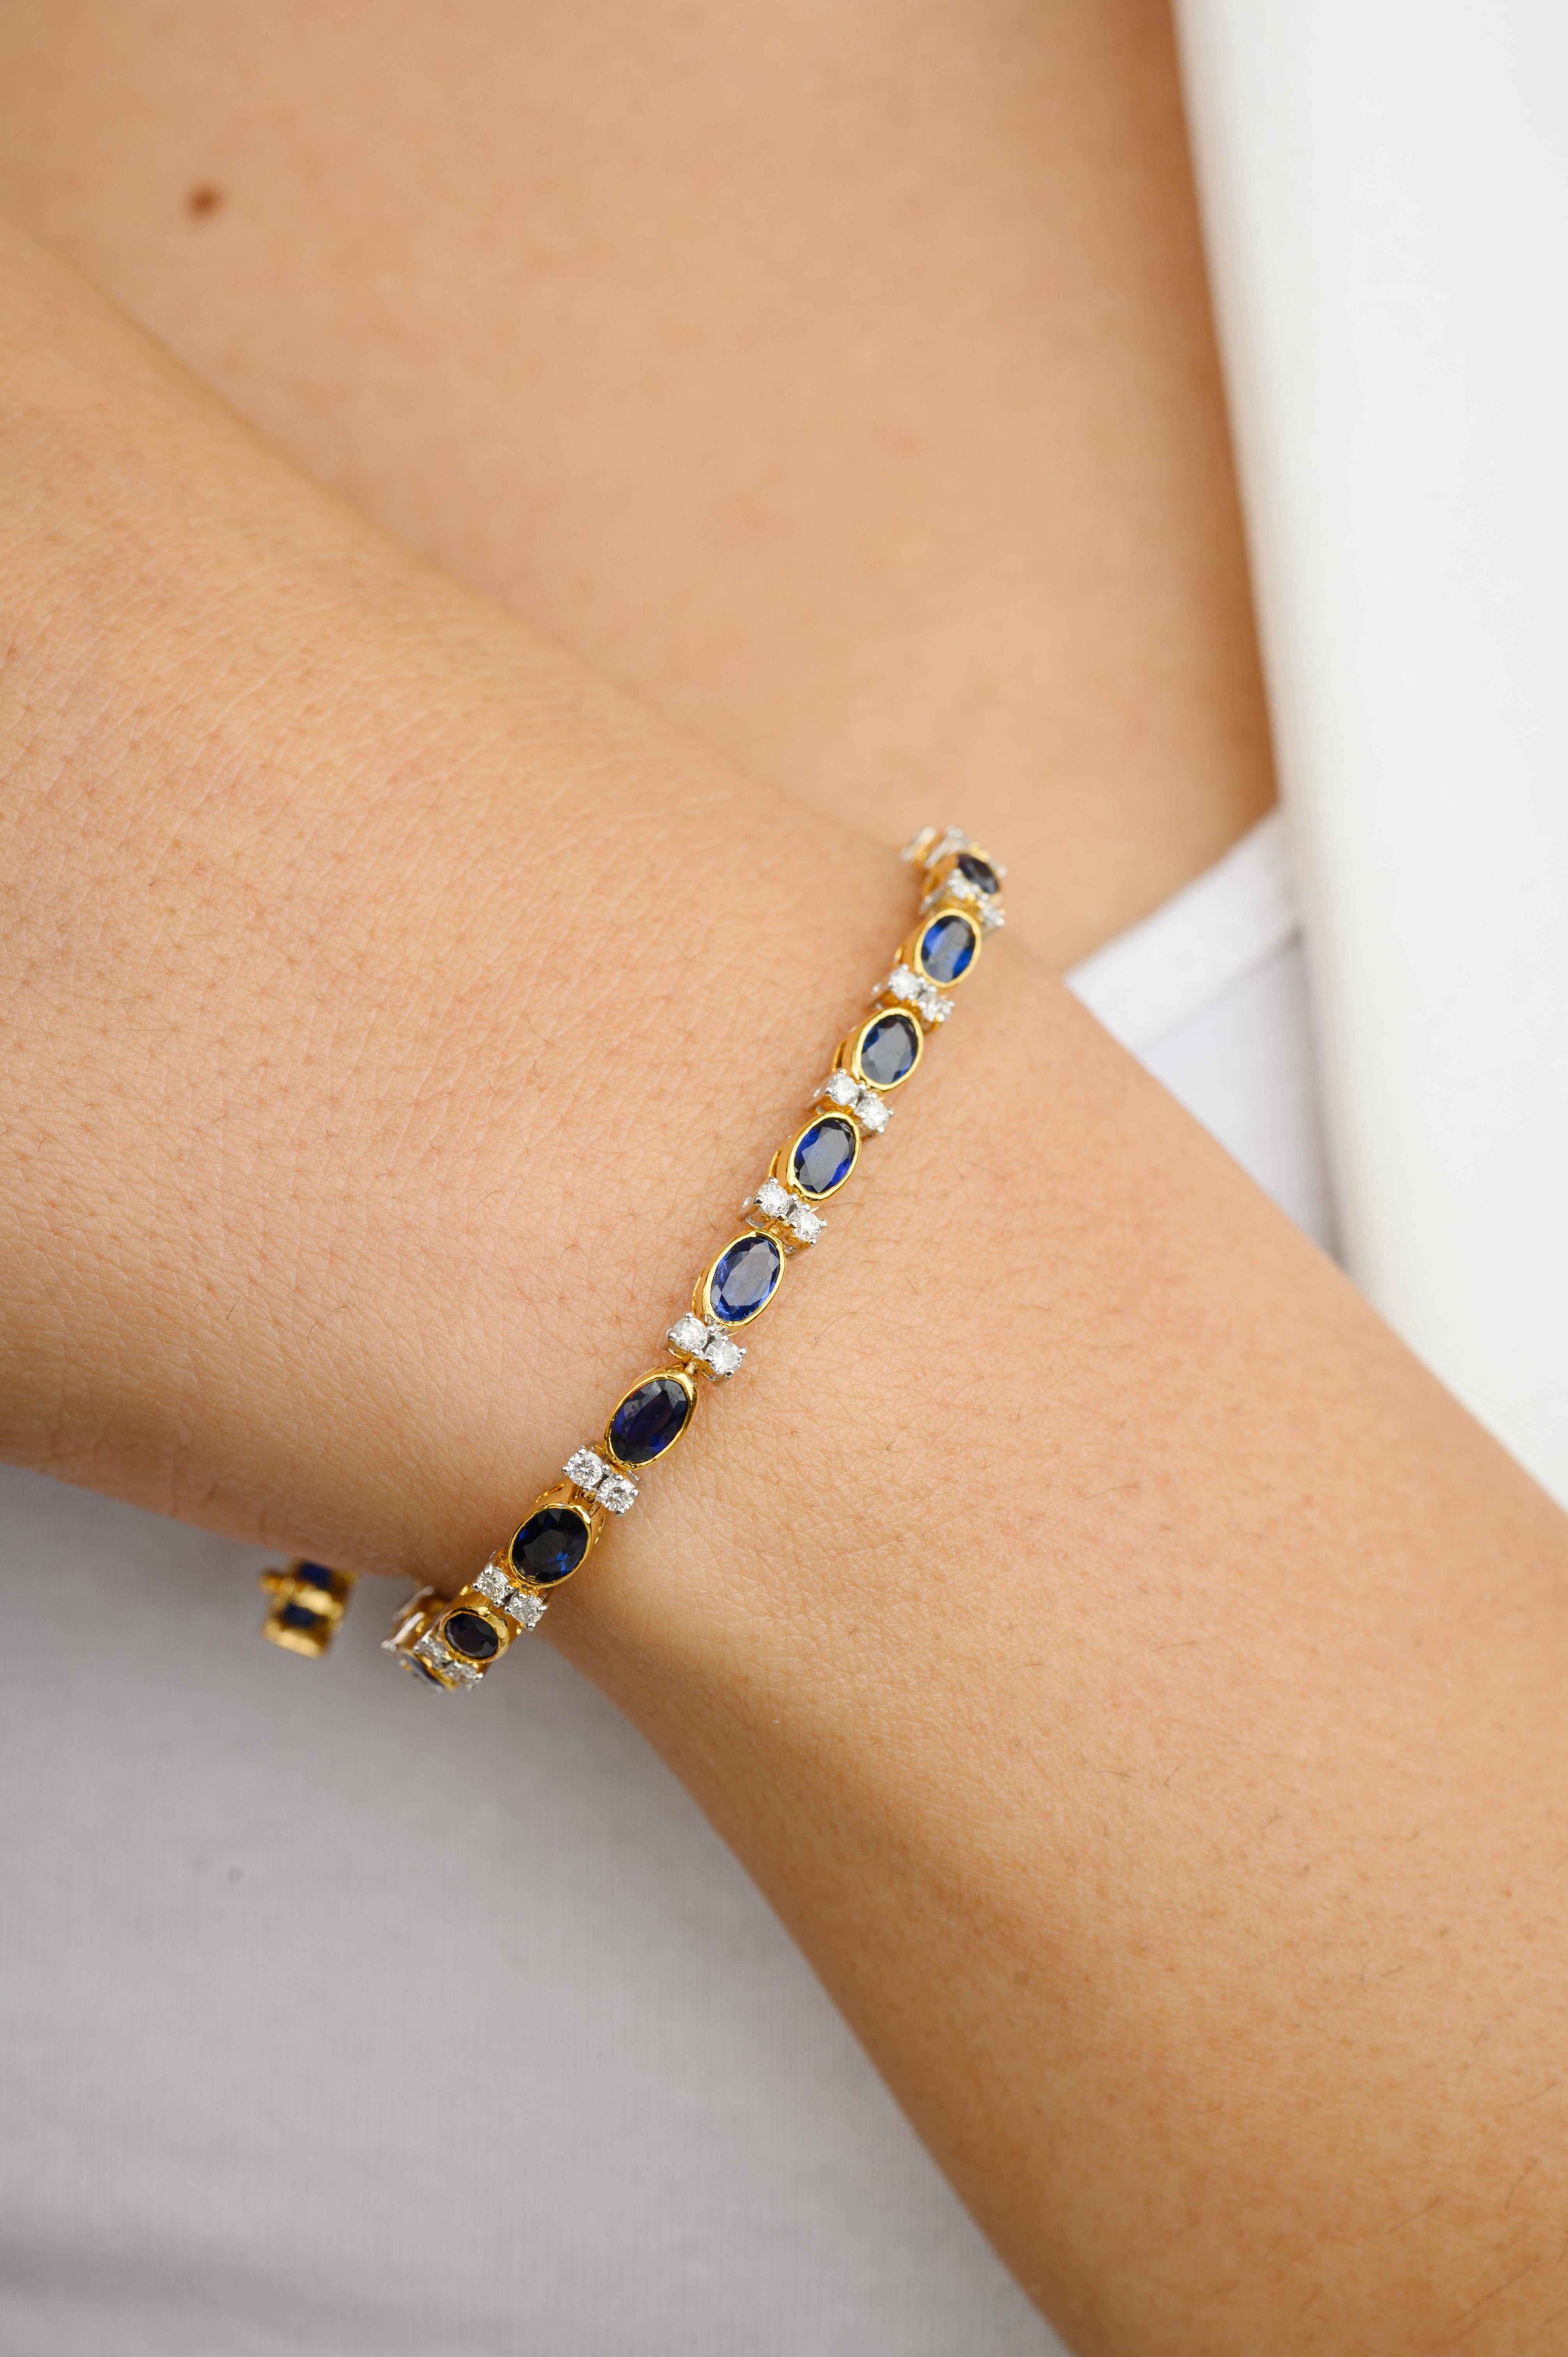 This 6.91 CTW Natural Blue Sapphire Diamond Wedding Tennis Bracelet in 18K gold showcases endlessly sparkling natural blue sapphire of 6.91 carats and 0.97 carats diamonds. It measures 7.25 inches long in length. 
Sapphire stimulates concentration